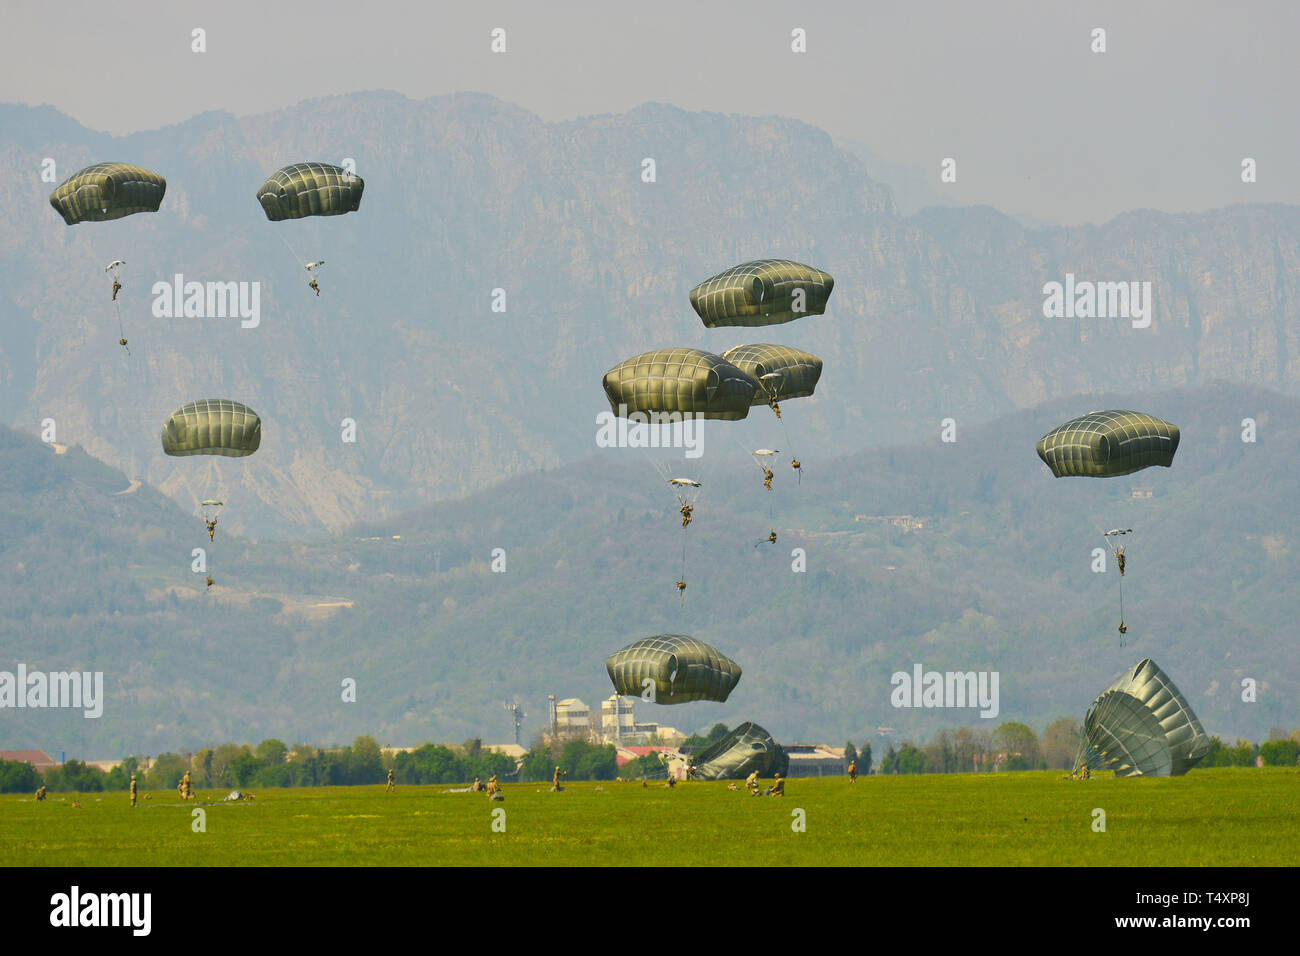 U.S. Army Paratroopers assigned to the 173rd Brigade Support Battalion, 173rd Airborne Brigade with British and Italian Army paratroopers, descend onto Juliet Drop Zone, Pordenone, Italy after exiting U.S. Air Force C-130 Hercules aircraft from the 86th Air Wing during airborne operation Apr. 16, 2019. The 173rd Airborne Brigade is the U.S. Army Contingency Response Force in Europe, capable of projecting ready forces anywhere in the U.S. European, Africa or Central Commands' areas of responsibility. (U.S. Army Photos by Davide Dalla Massara) Stock Photo